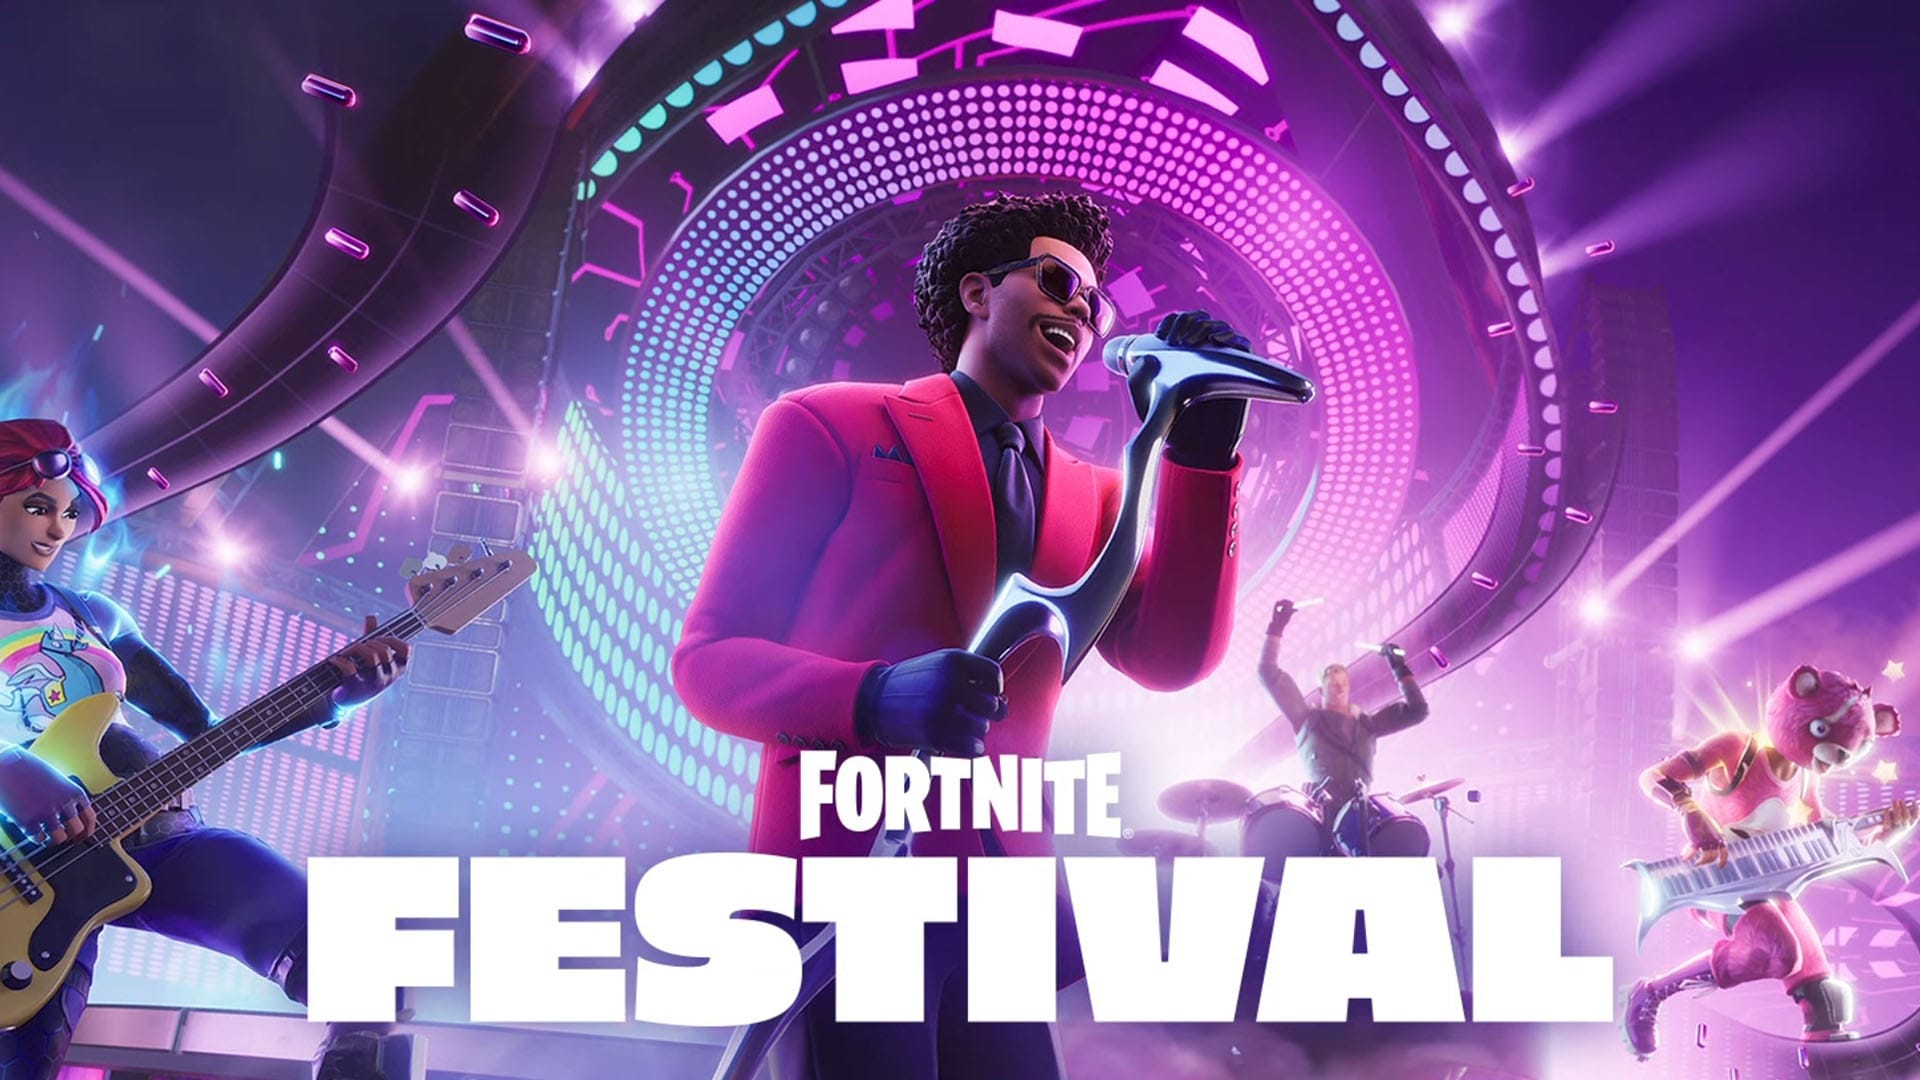 Fortnite Festival Reveals First Glimpse of The Weeknd Gameplay